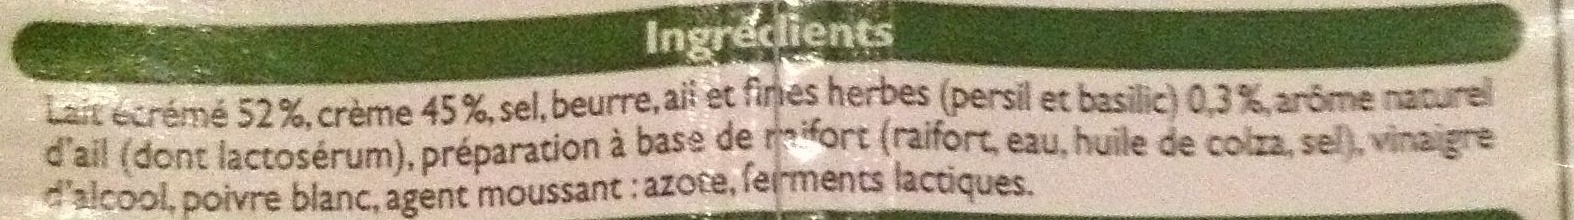 Ail et fines herbes fromage à tartiner (27% MG) - Ingredients - fr